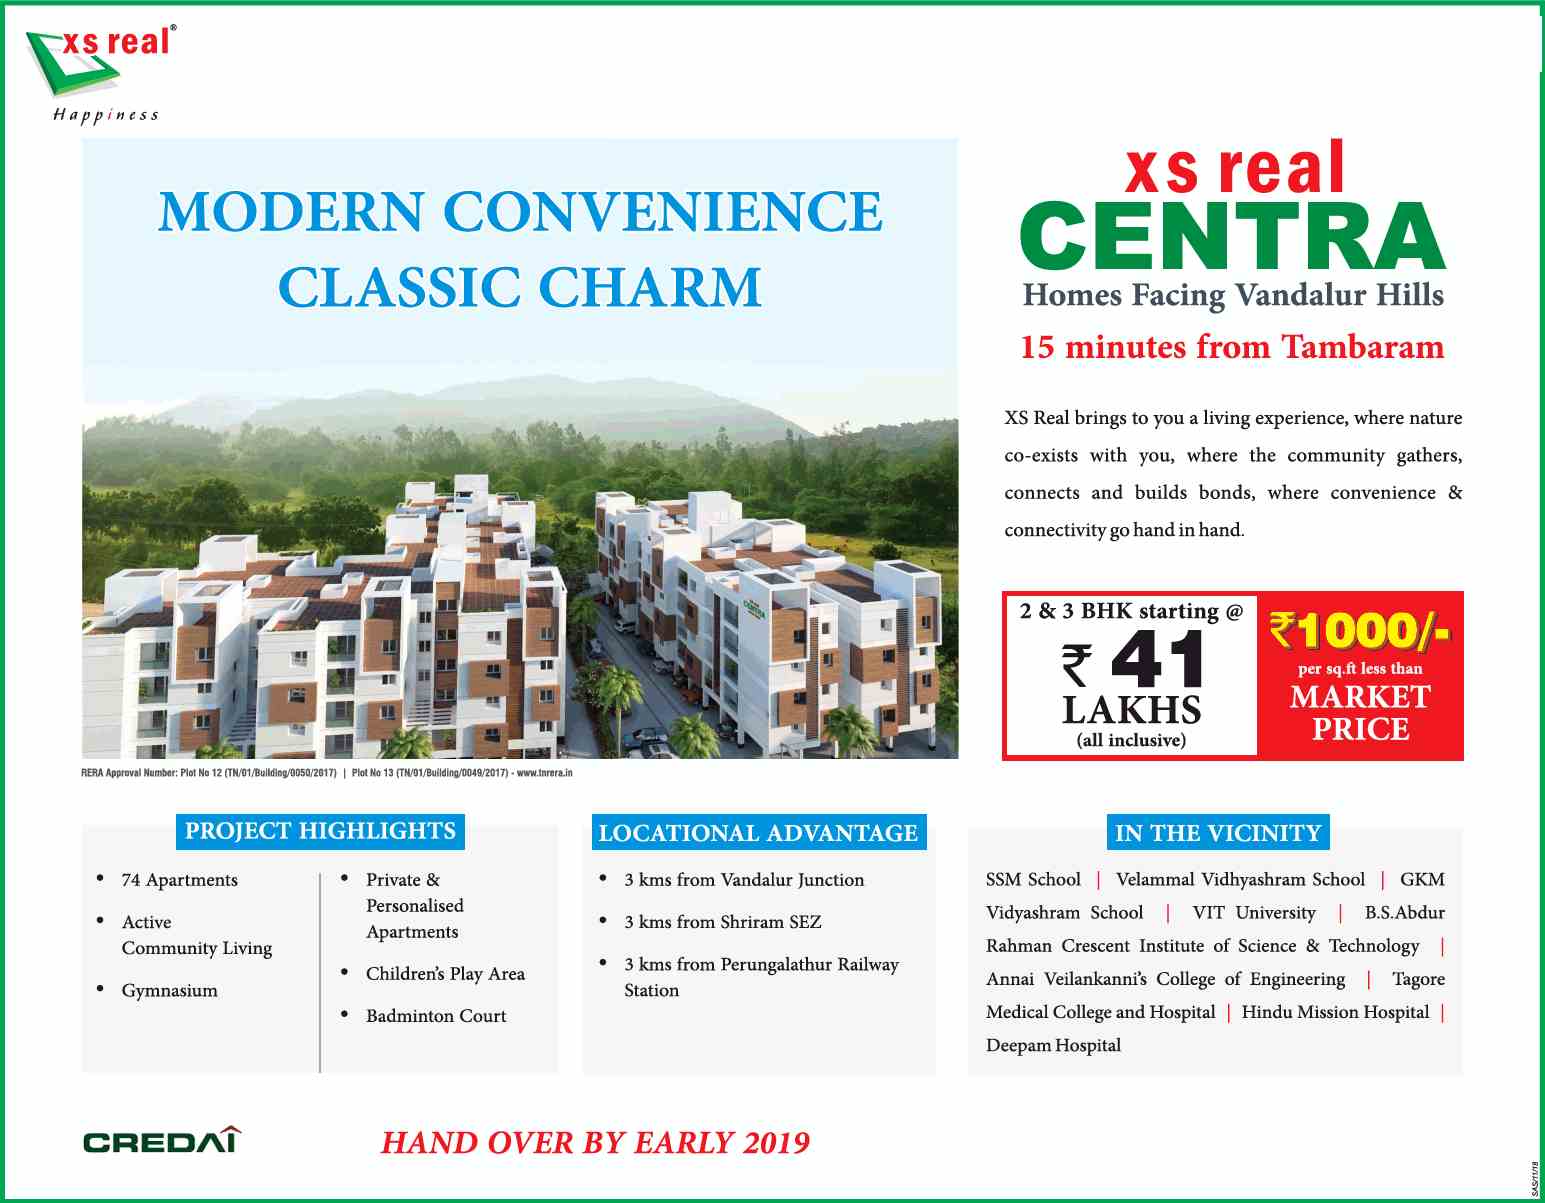 Book 2 & 3 BHK @ Rs 41 Lakhs at XS Real Centra in Chennai Update